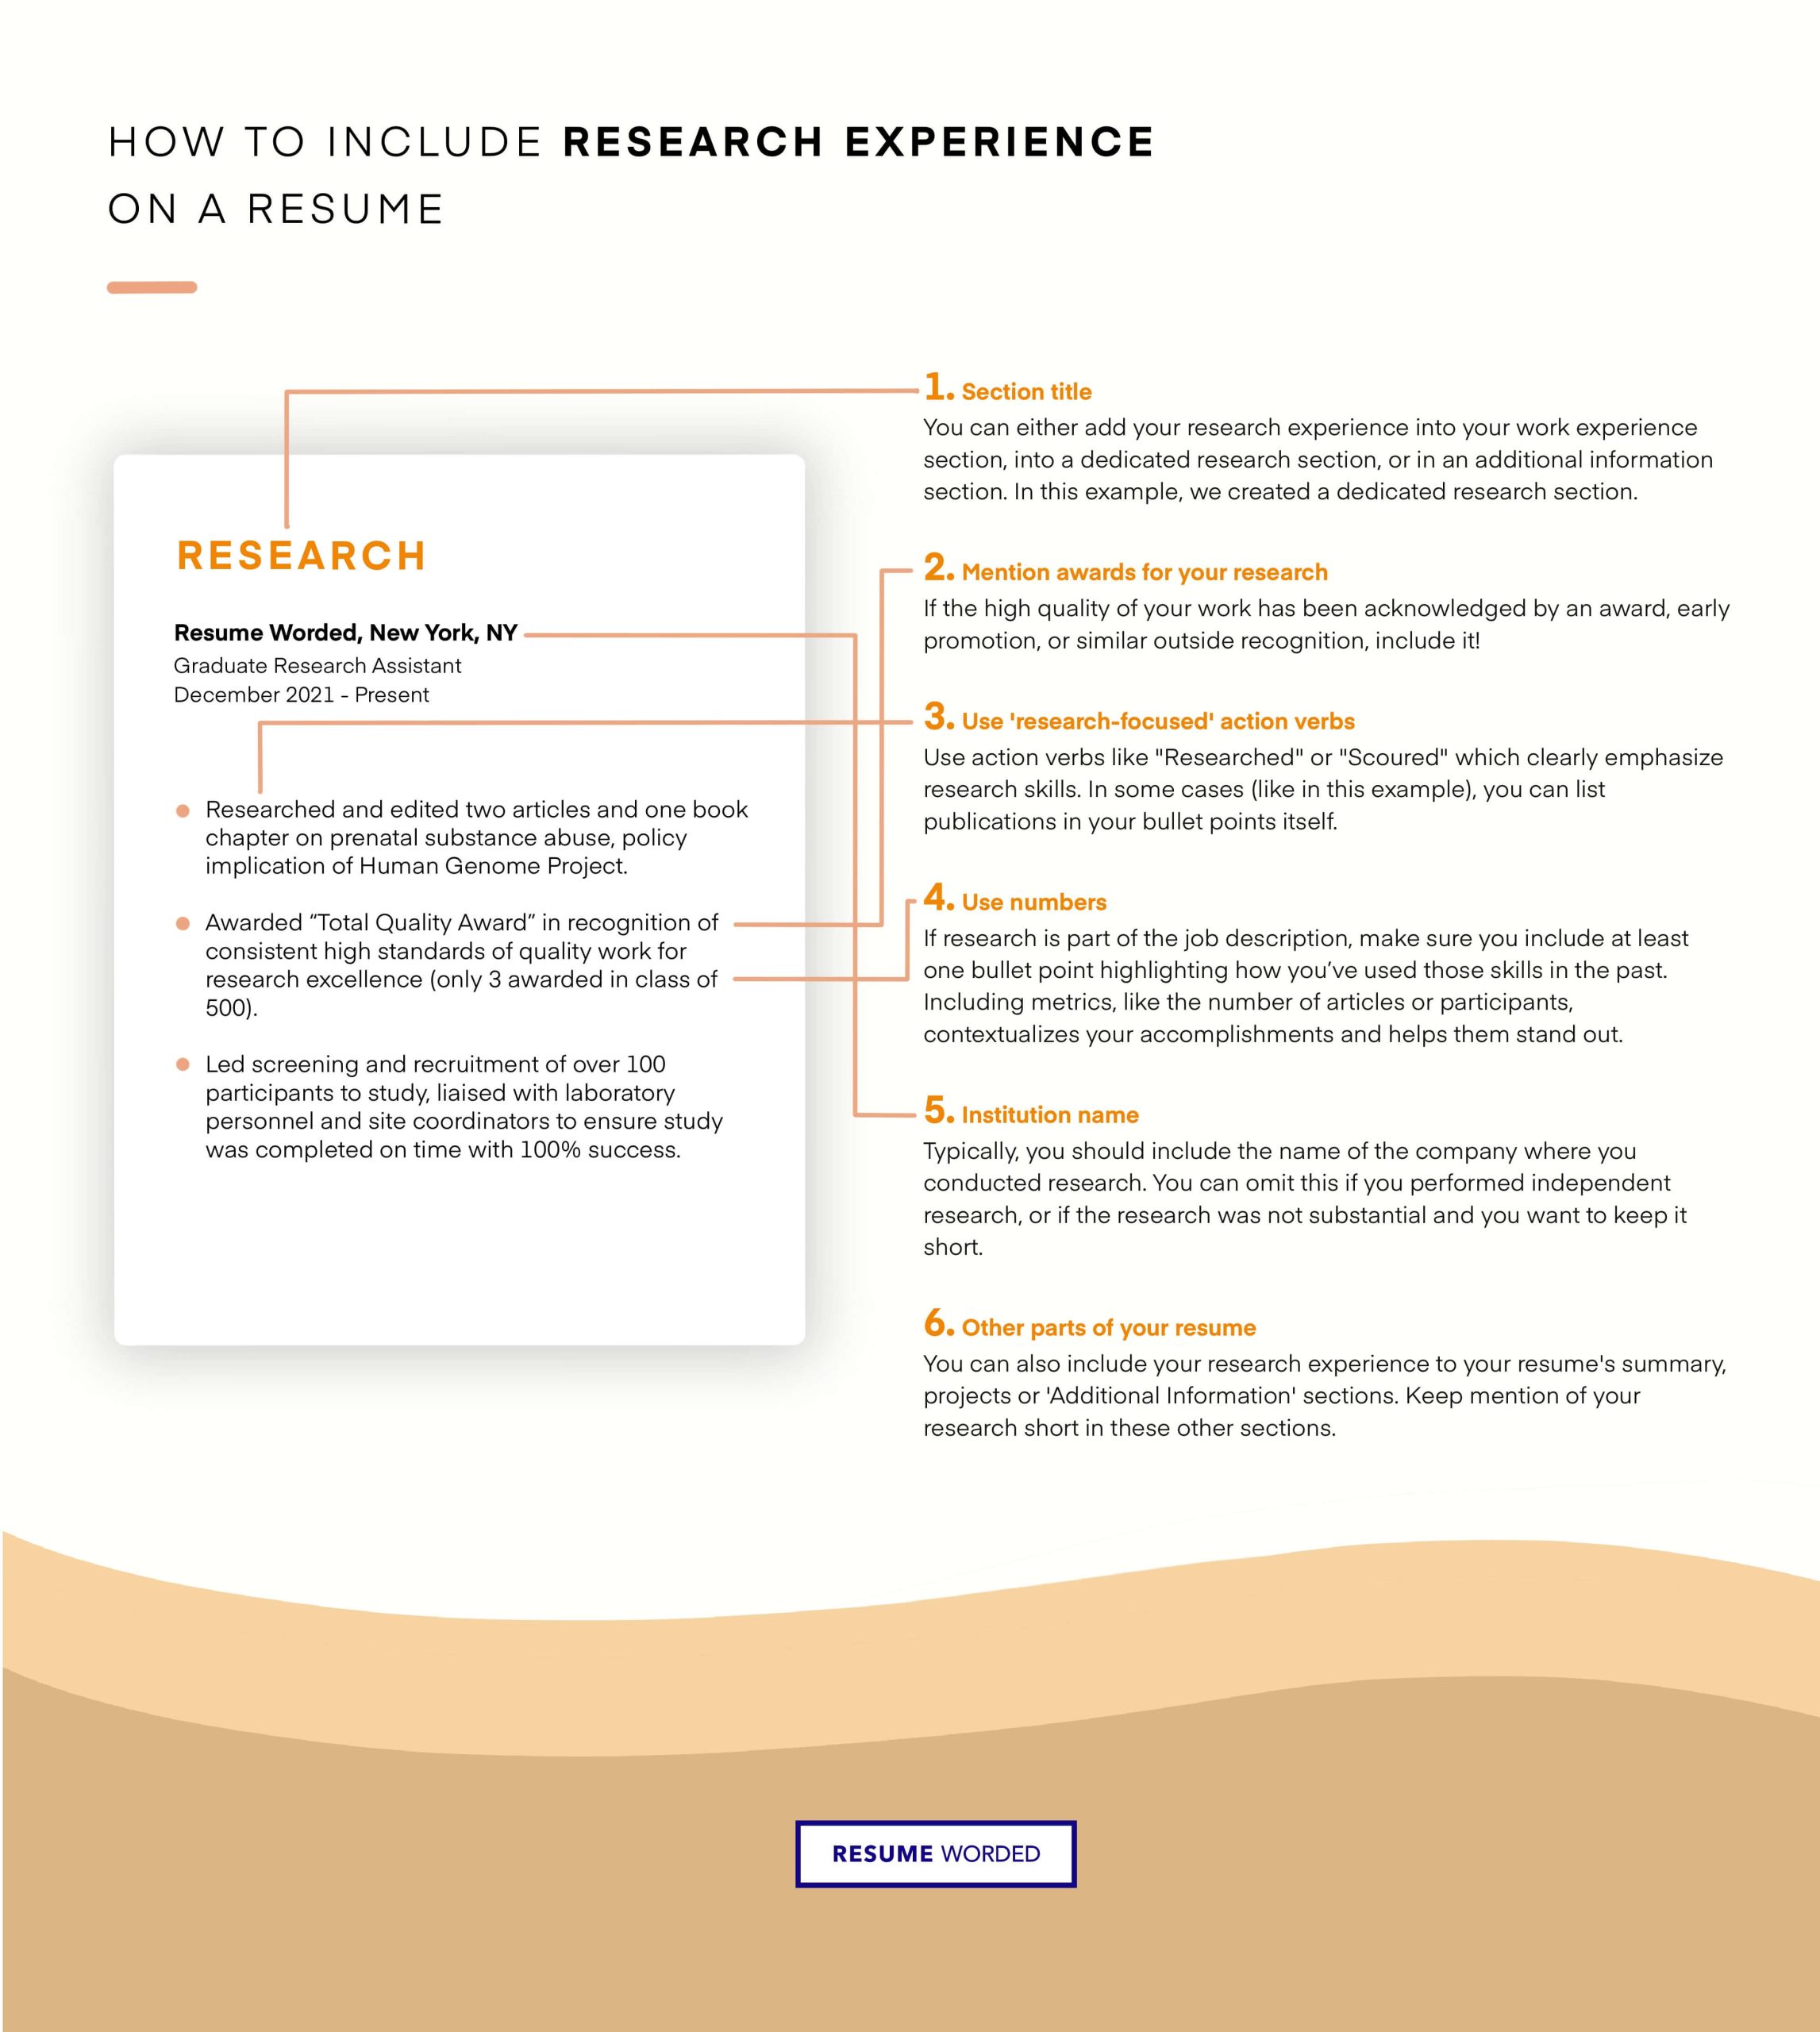 Clinical Research Coordinator Resume Free Sample Resume Skills and Keywords for Clinical Research Coordinator …